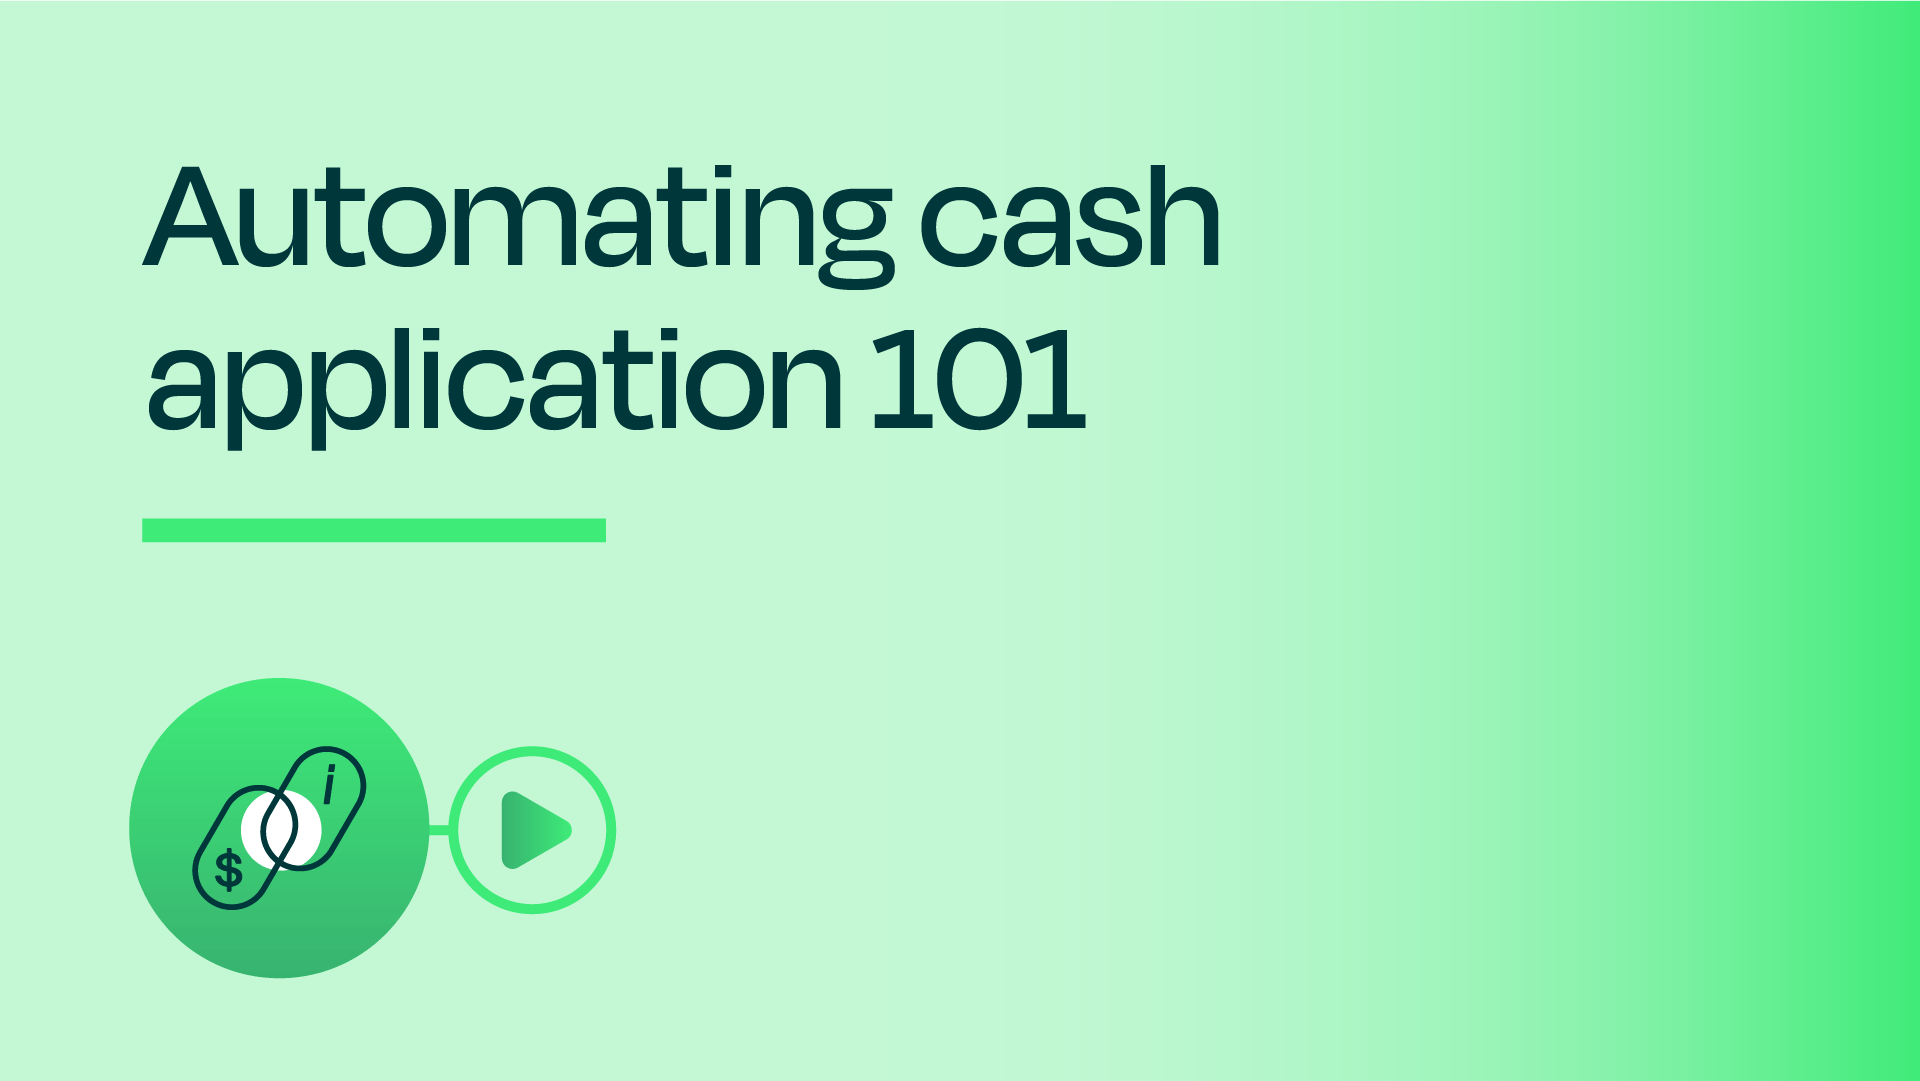 Automating cash application 101